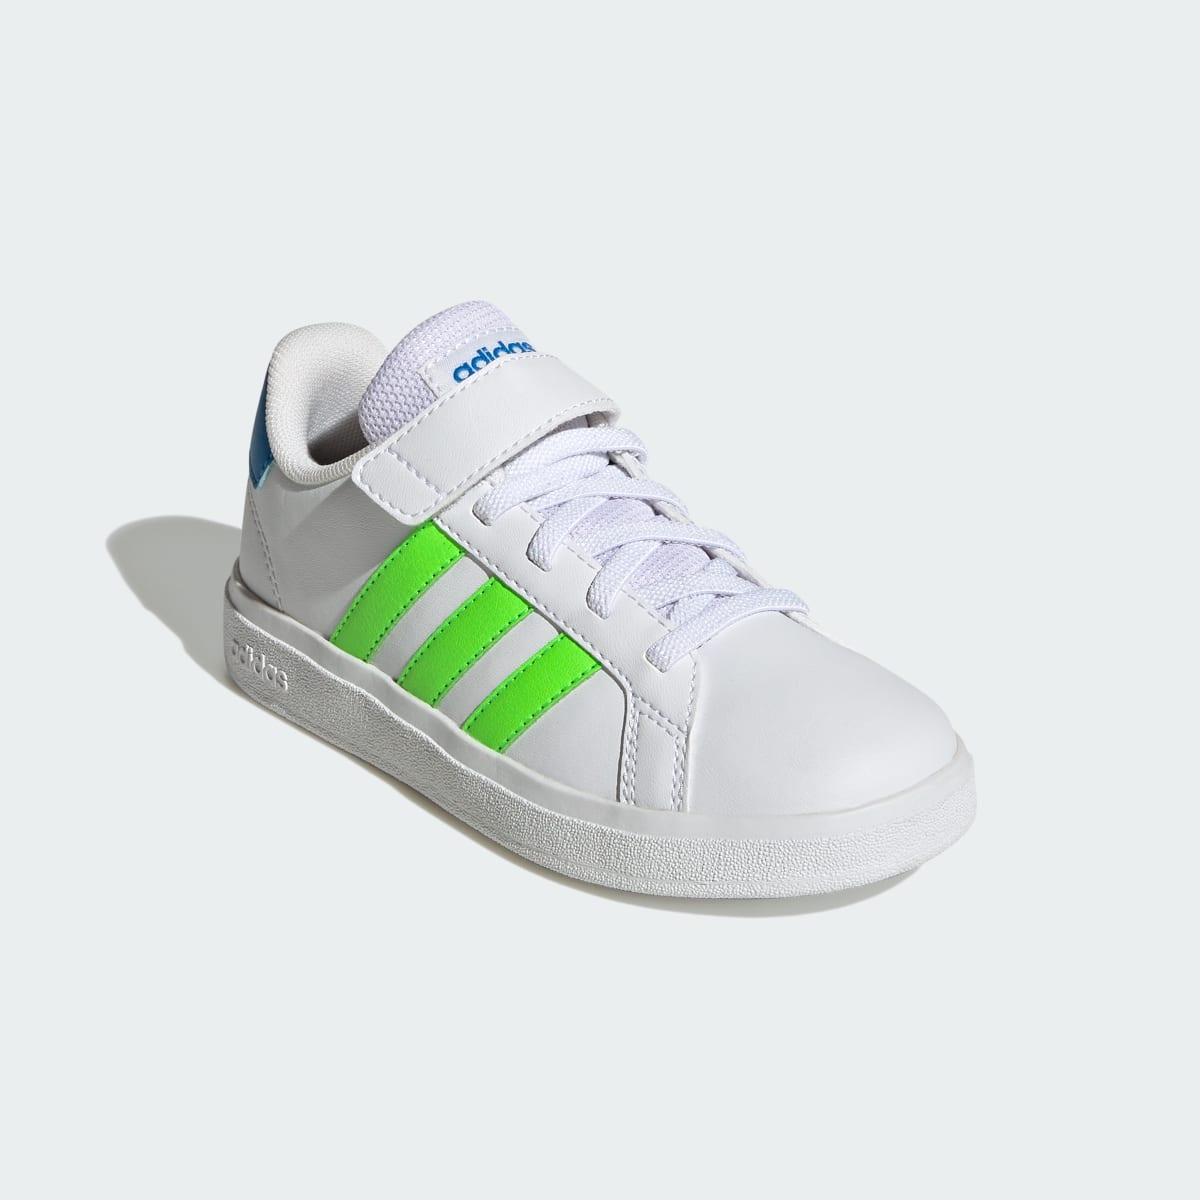 Adidas Scarpe Grand Court Elastic Lace and Top Strap. 5